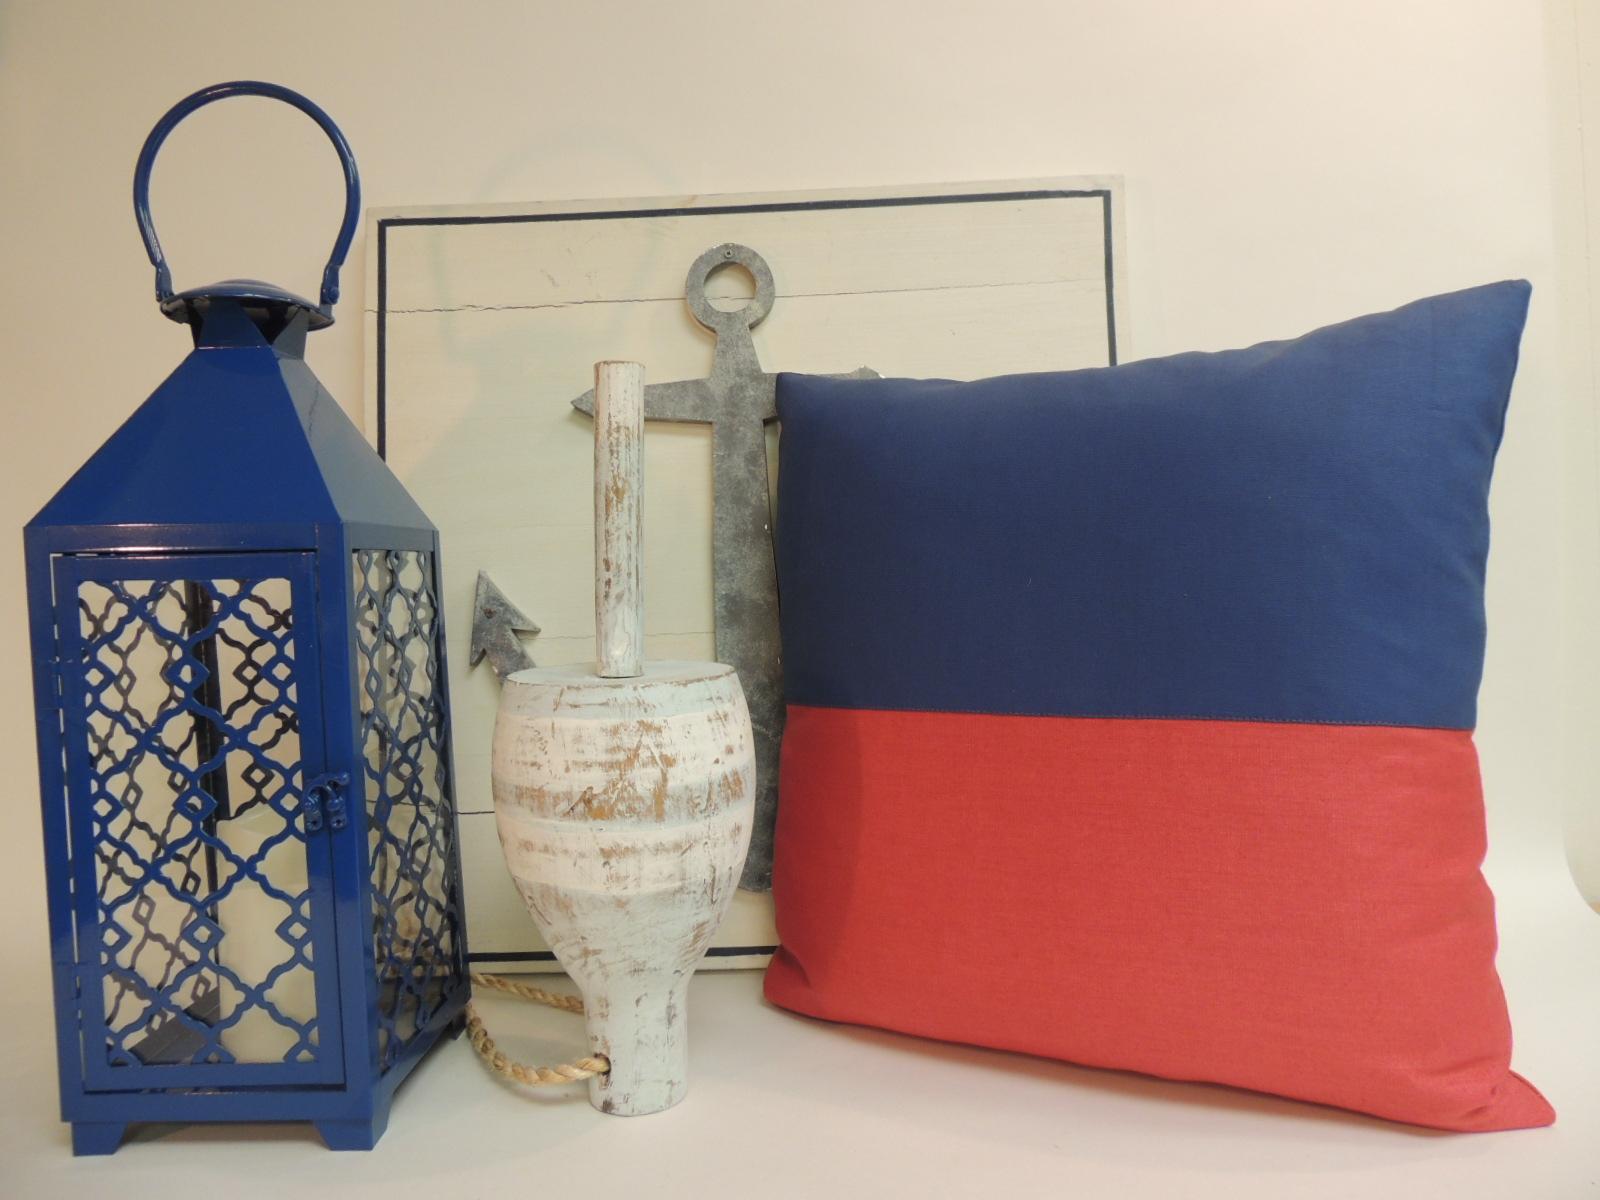 Red and blue nautical flag inspired square decorative pillows.
Doubled sided, red linen and heavy cotton blue fabrics.
Decorative pillows handcrafted and designed in the USA.
Closure by stitch (no zipper closure) with custom made pillow